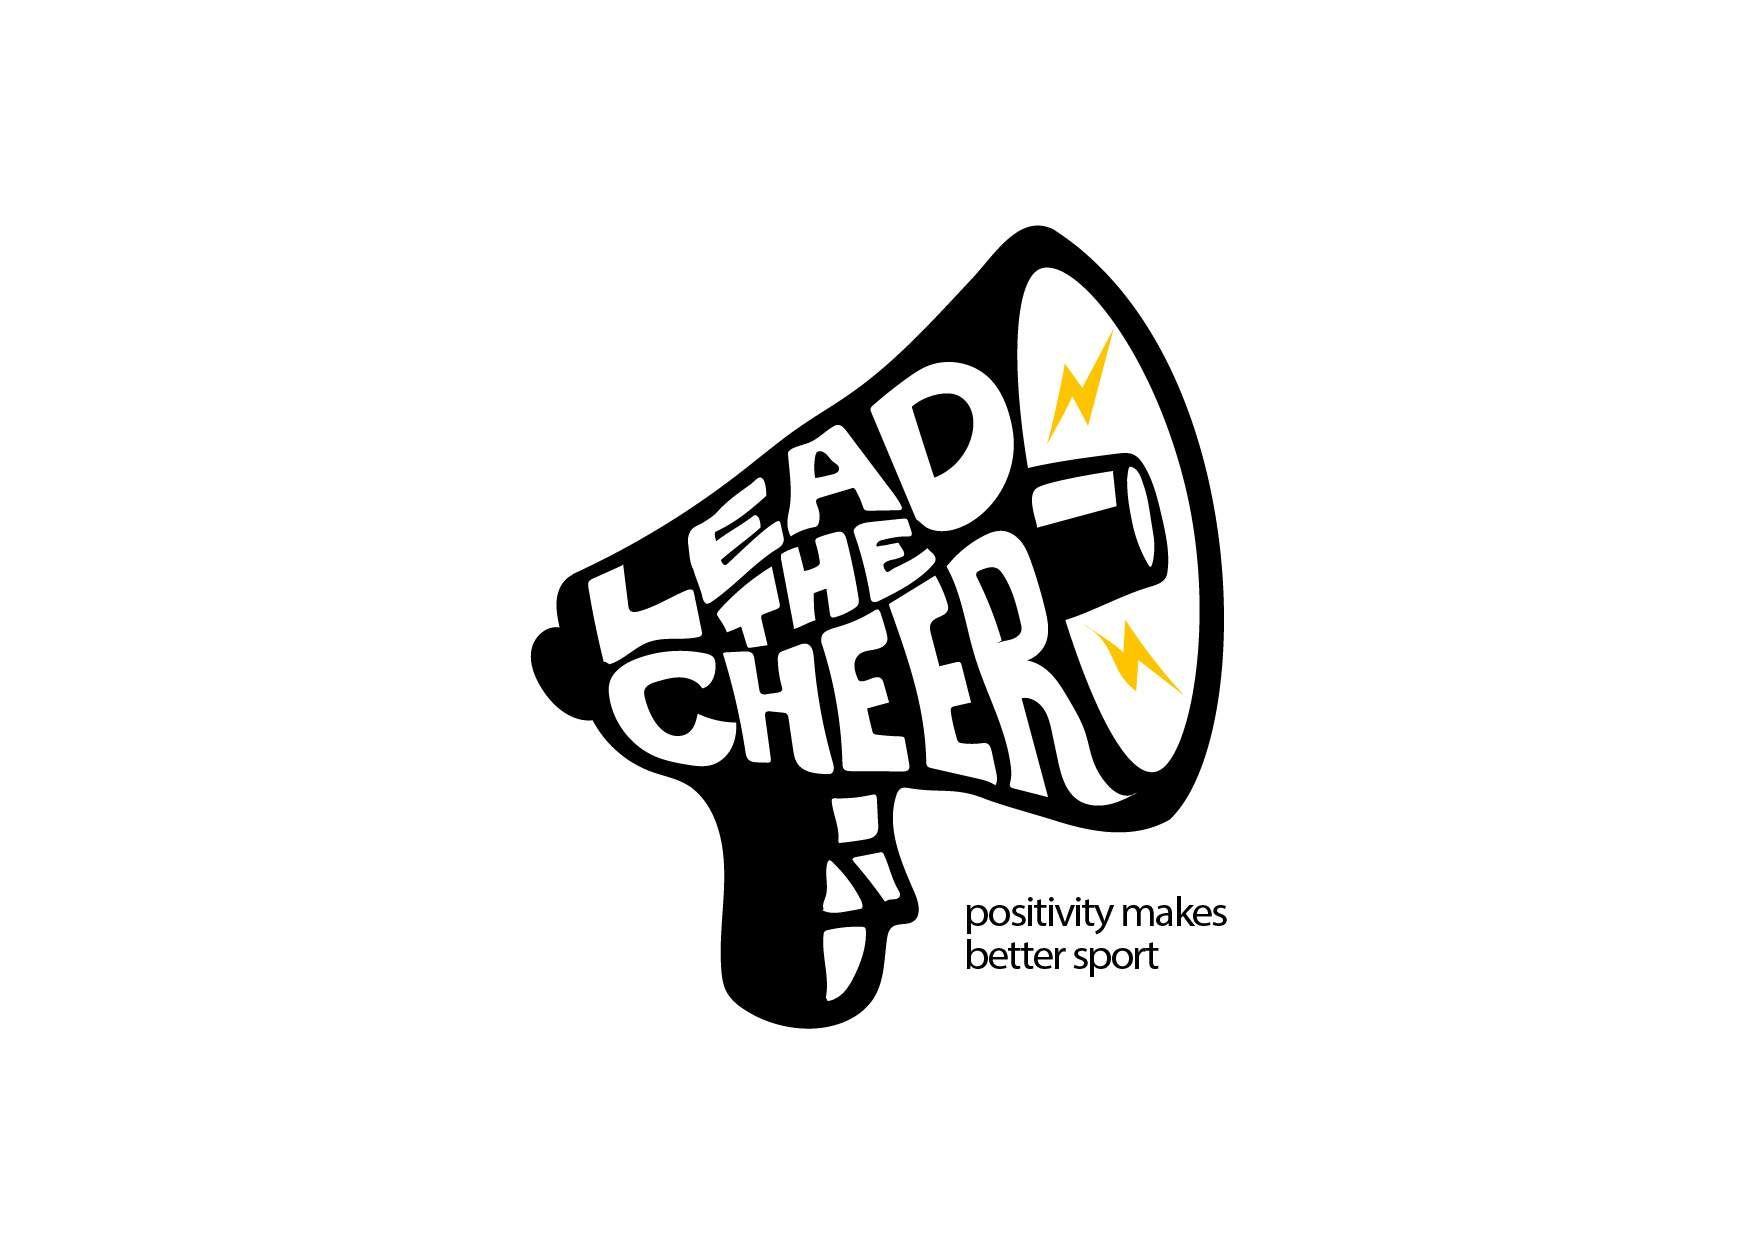 Cheer Logo - This is the page we will use for the Lead the Cheer resources